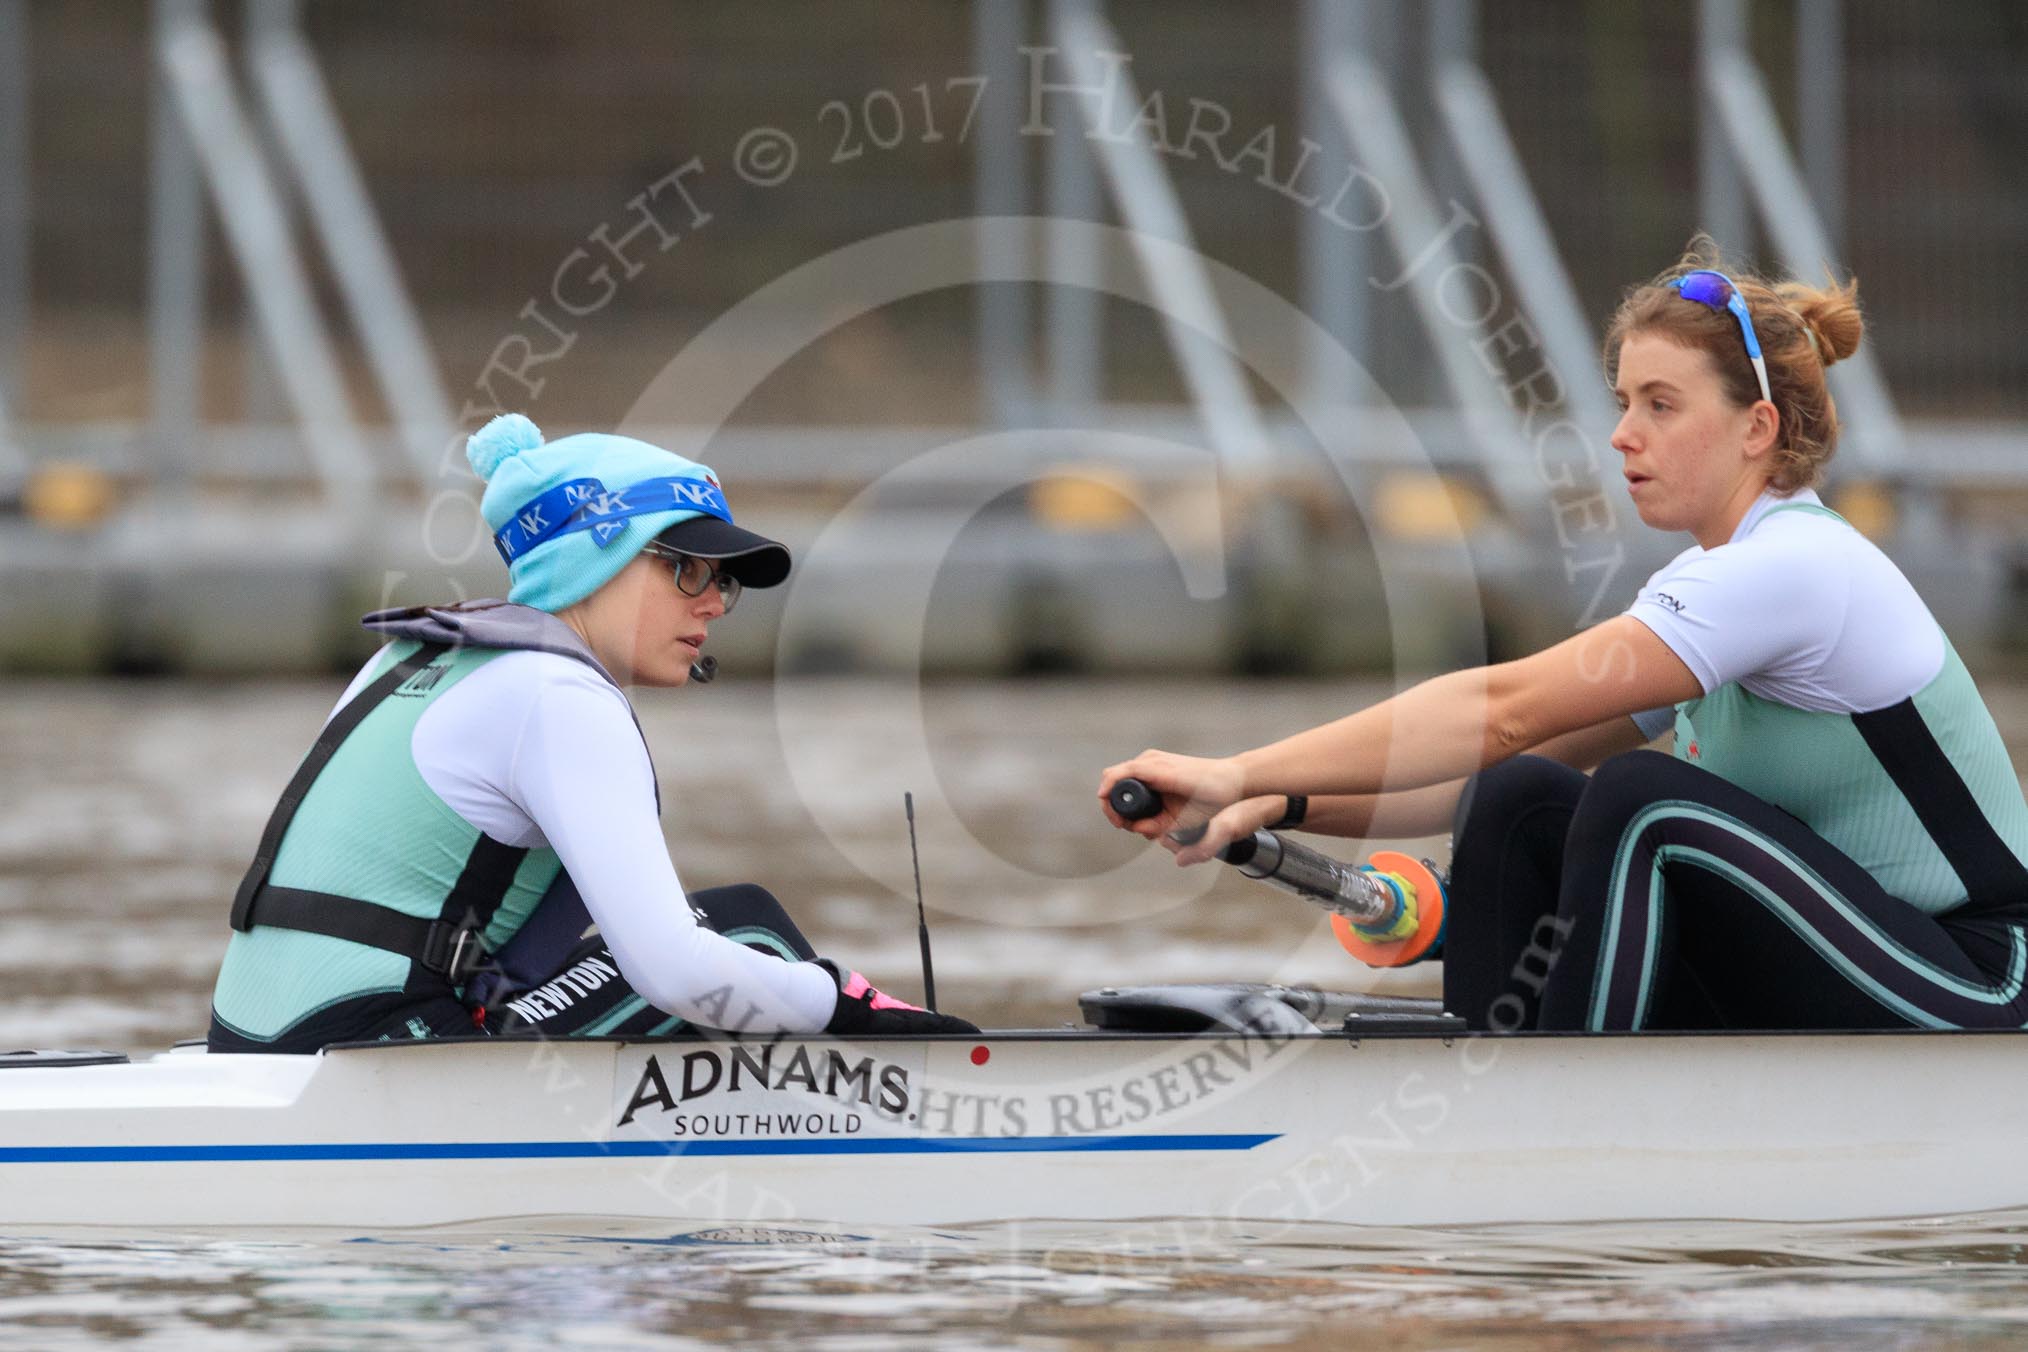 The Boat Race season 2018 - Women's Boat Race Trial Eights (CUWBC, Cambridge): Expecto Patronum at the start line, here cox Sophie Shapter, stroke Alice White.
River Thames between Putney Bridge and Mortlake,
London SW15,

United Kingdom,
on 05 December 2017 at 12:43, image #51